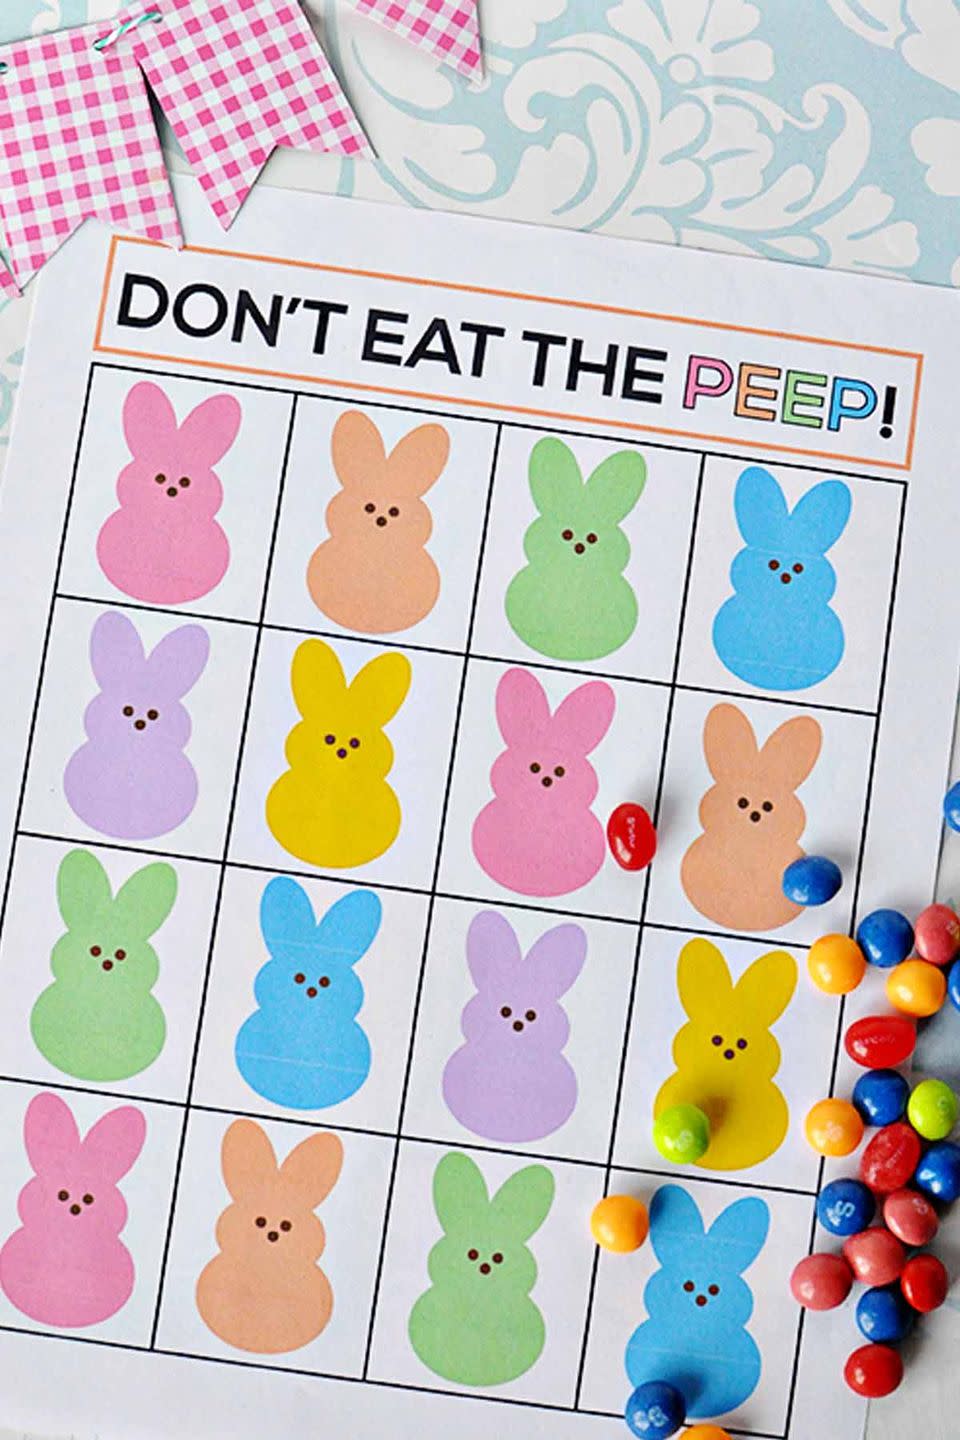 Don't Eat the Peep!